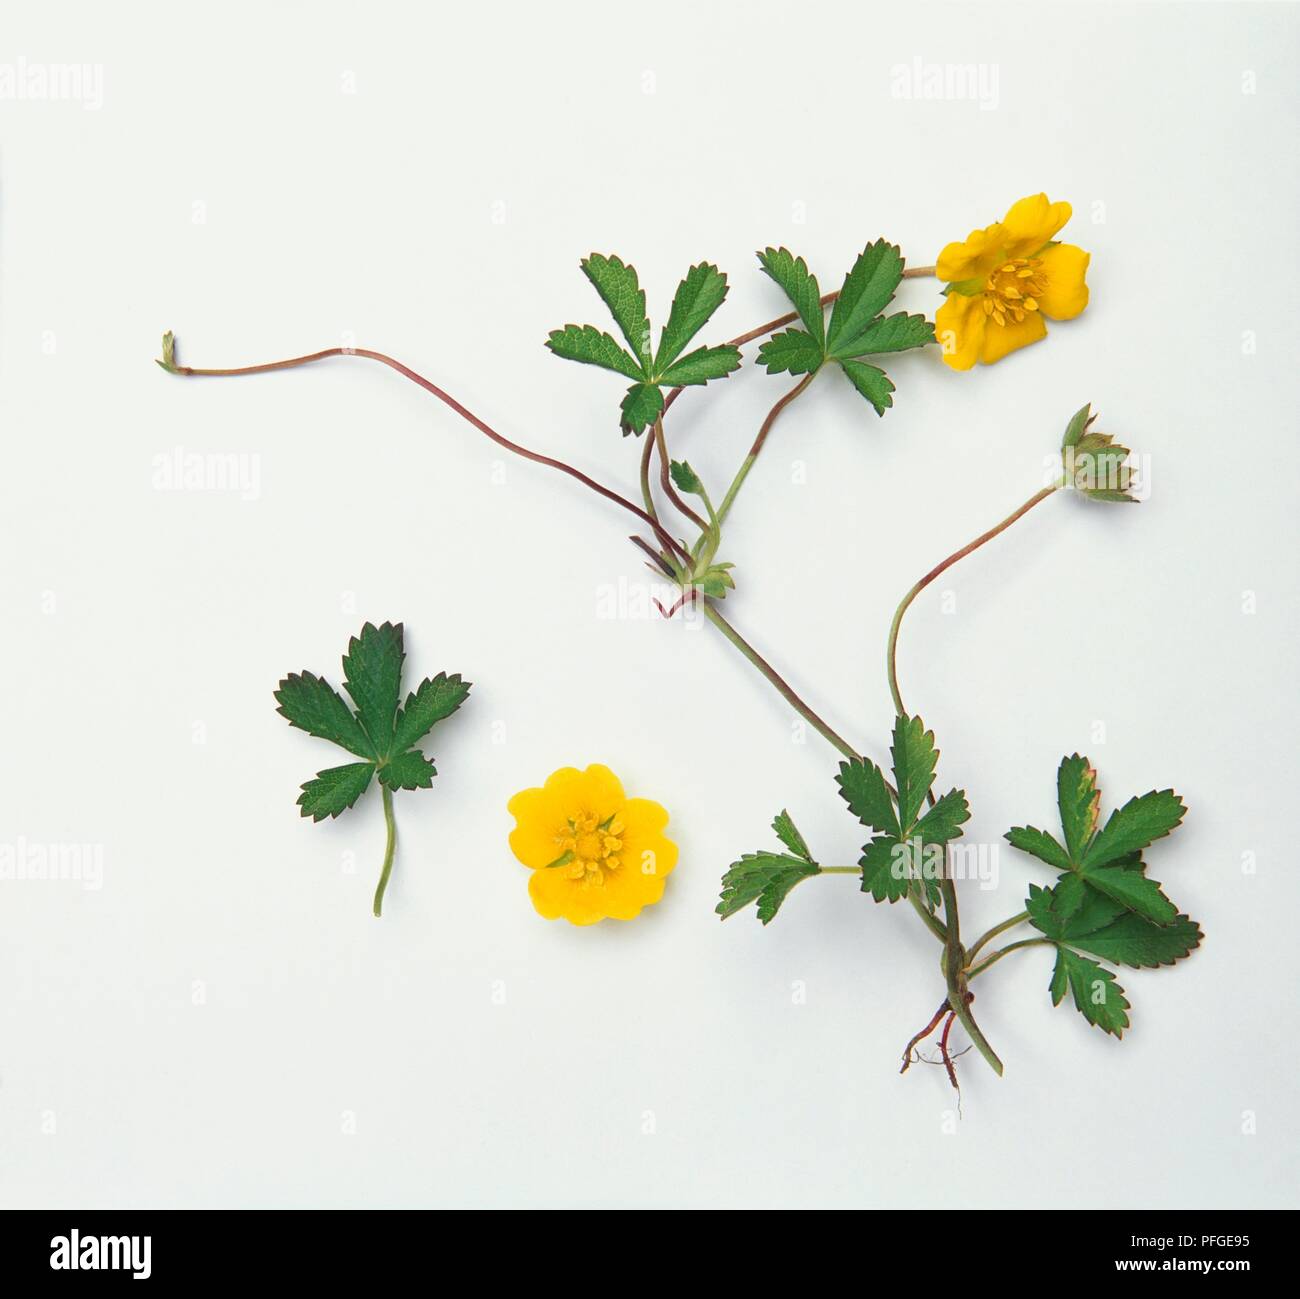 Potentilla reptans (Creeping cinquefoil), yellow flowers, leaves and rooting nodes Stock Photo